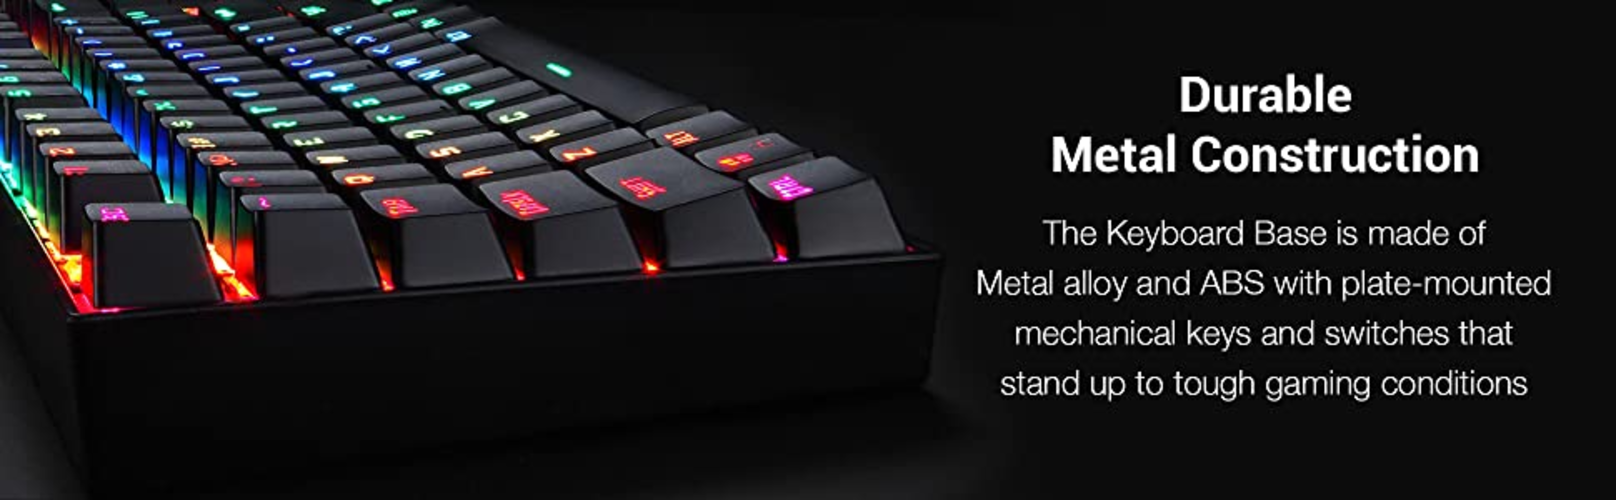 Redragon Wired K551 RGB Mechanical Gaming Keyboard with Cherry MX Blue Switches